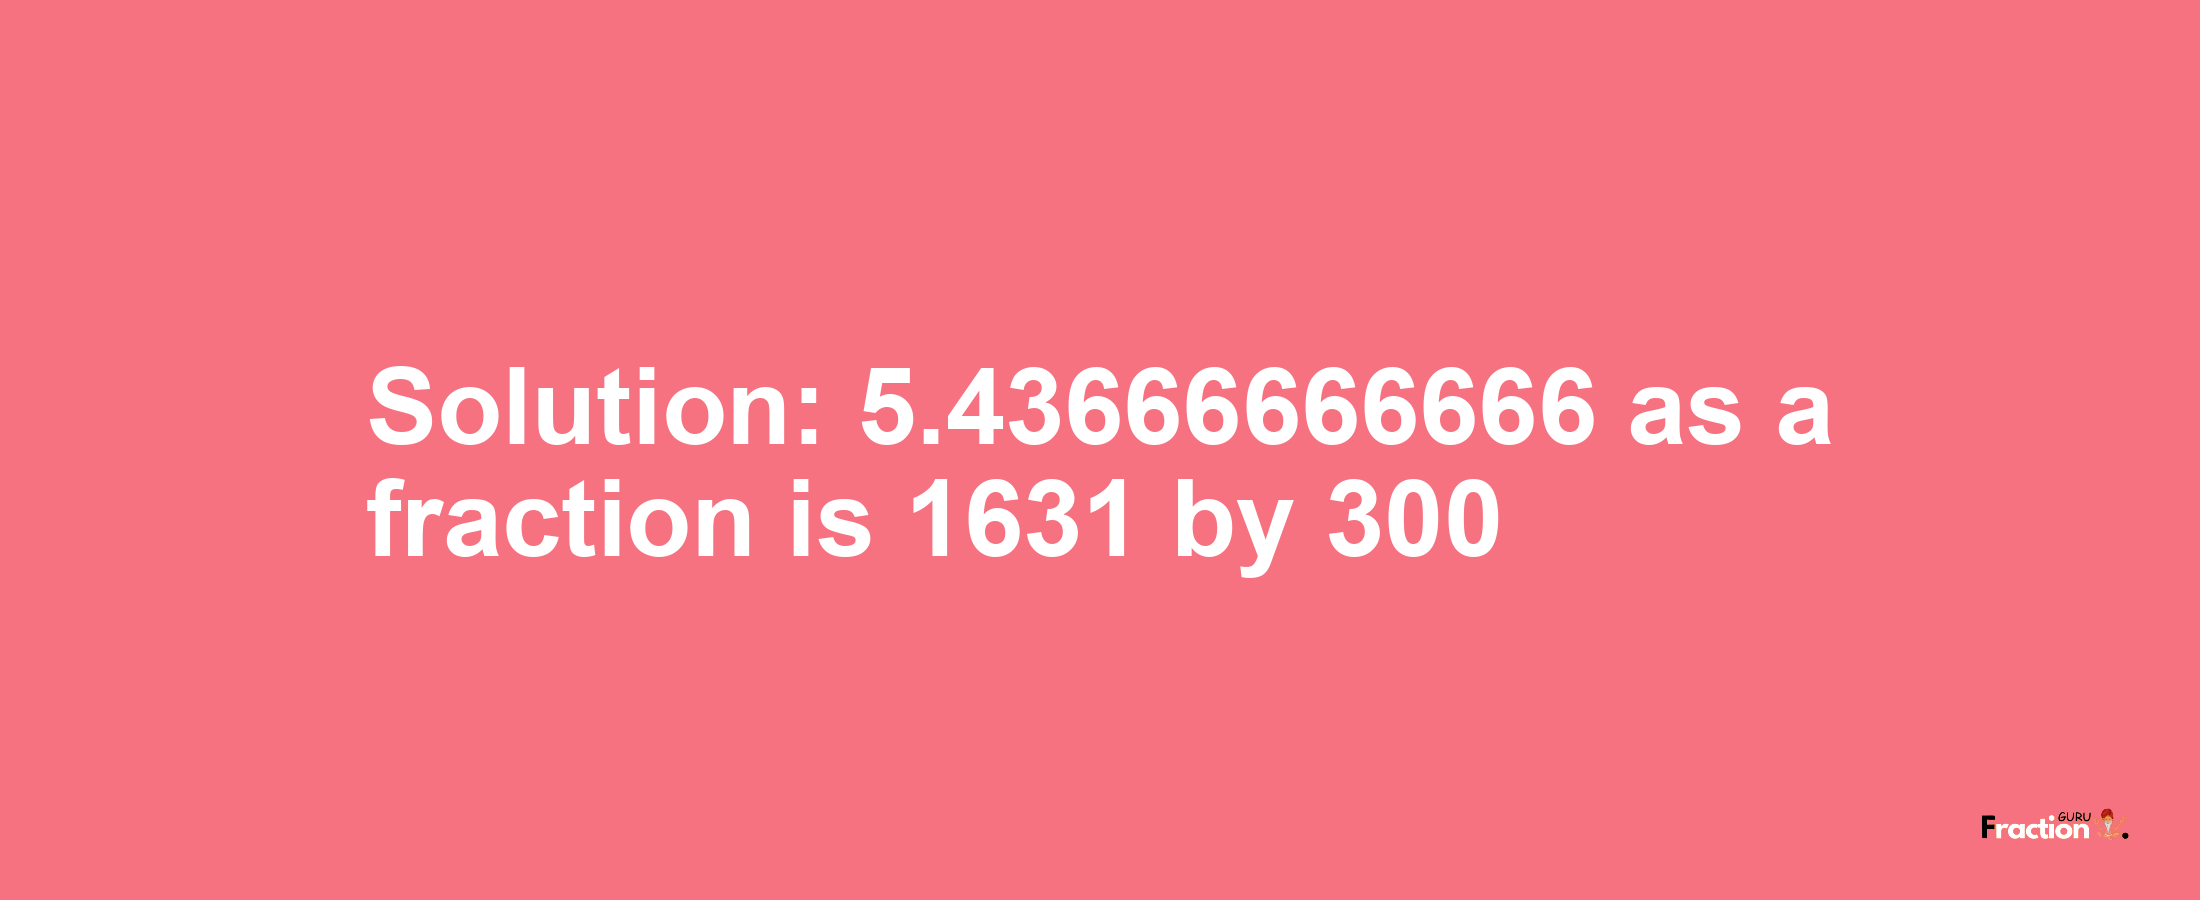 Solution:5.43666666666 as a fraction is 1631/300